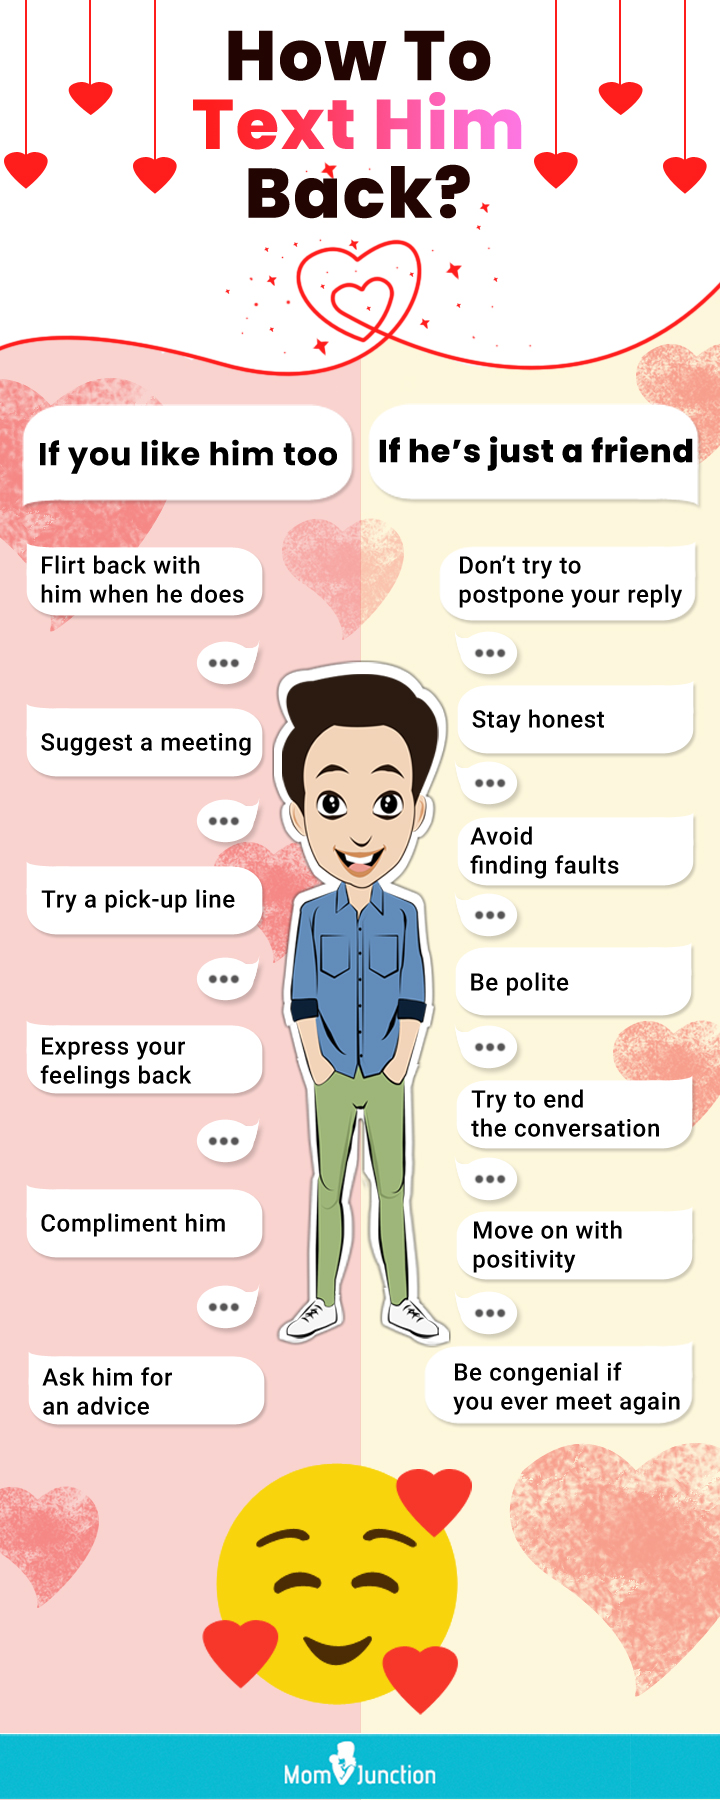 how to tell if a guy likes you, over text [infographic]